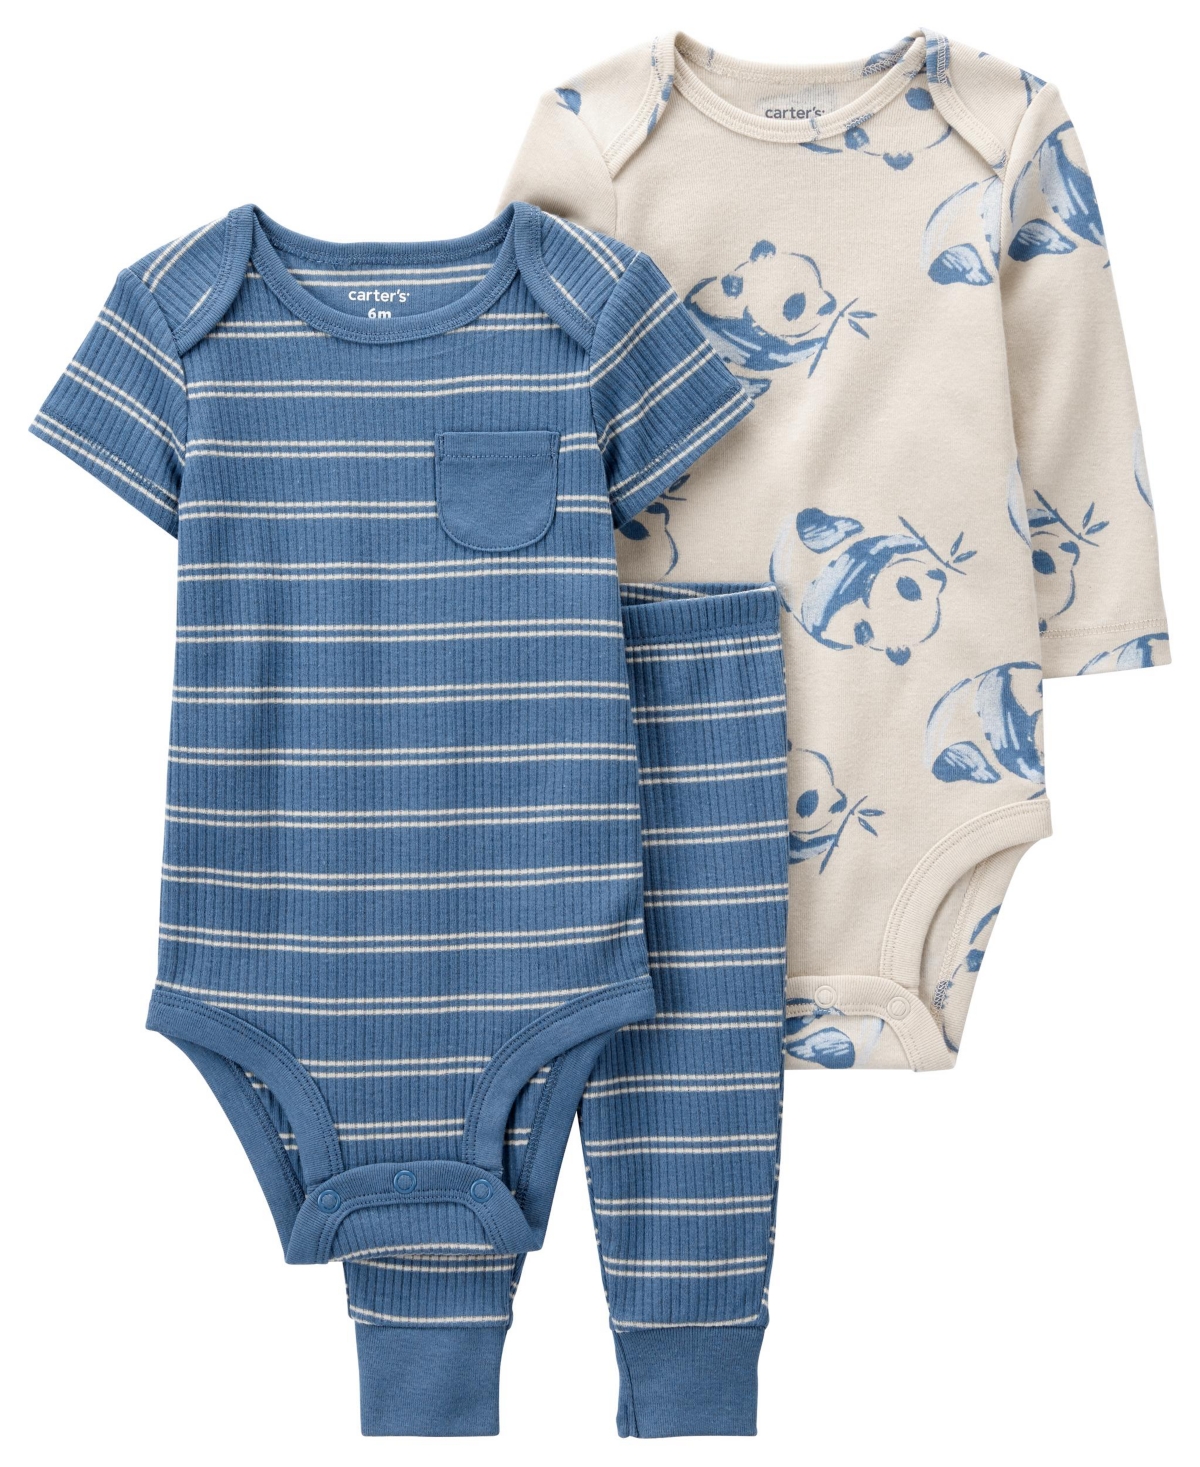 Carter's Baby Boys Panda Little Character Bodysuits And Pants, 3 Piece Set In Blue